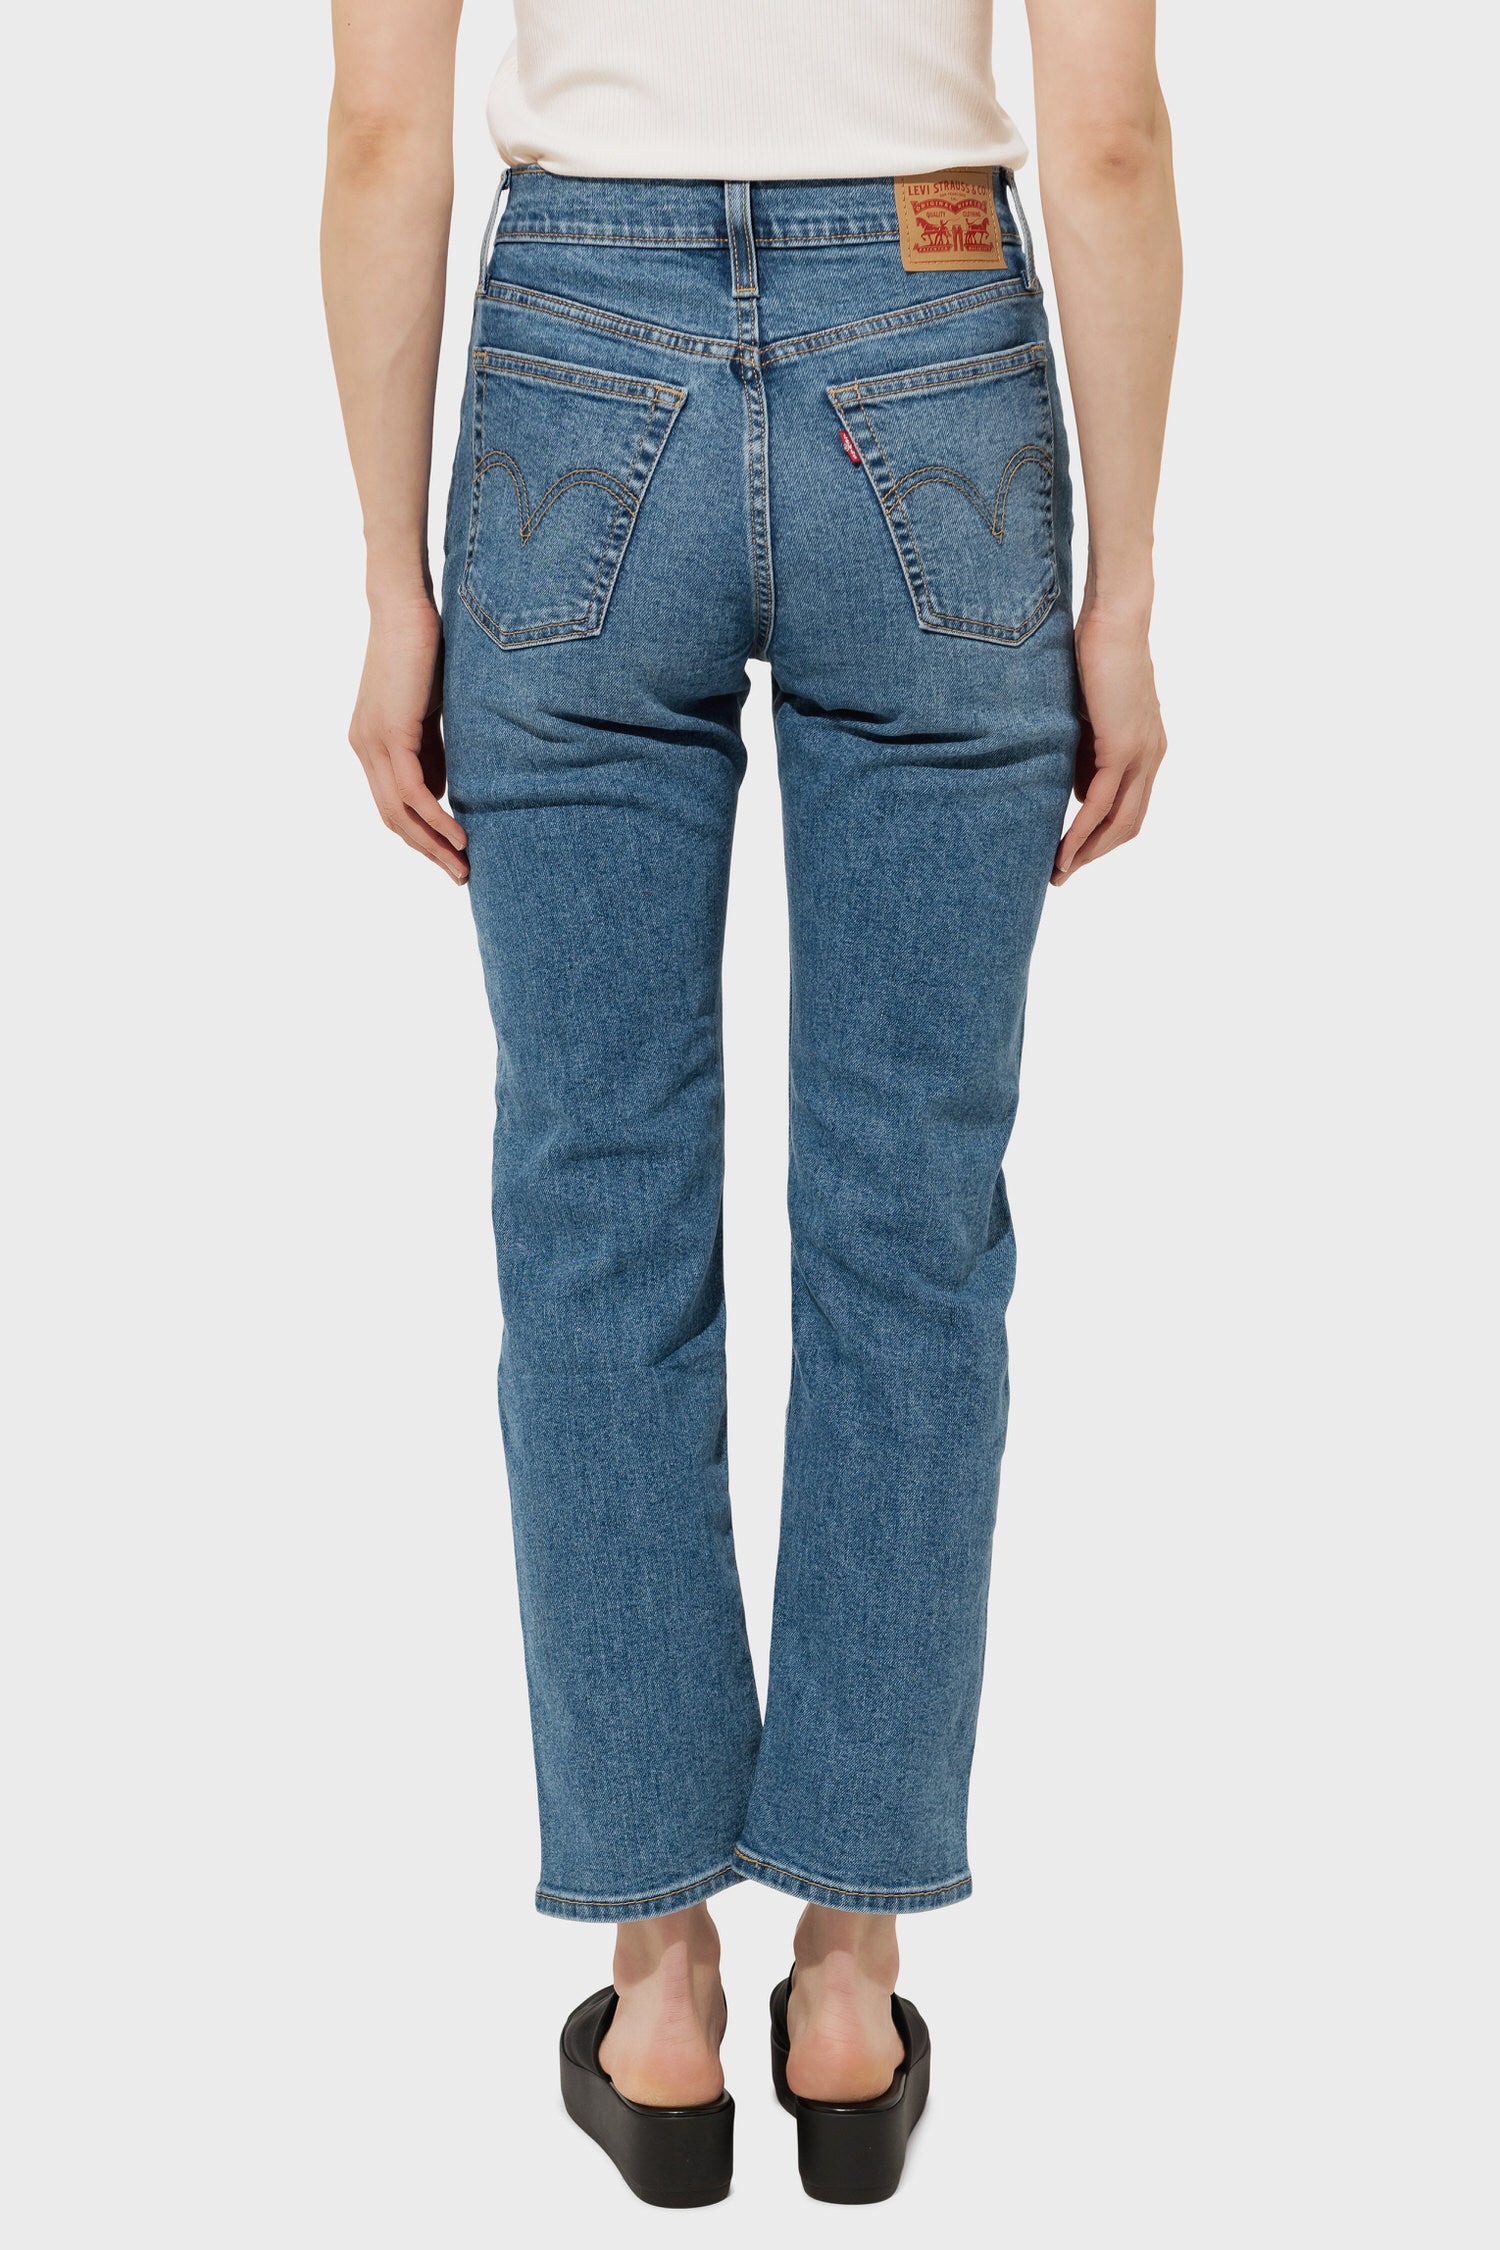 Women's Levi's Wedgie Straight Fit in Love in the Mist